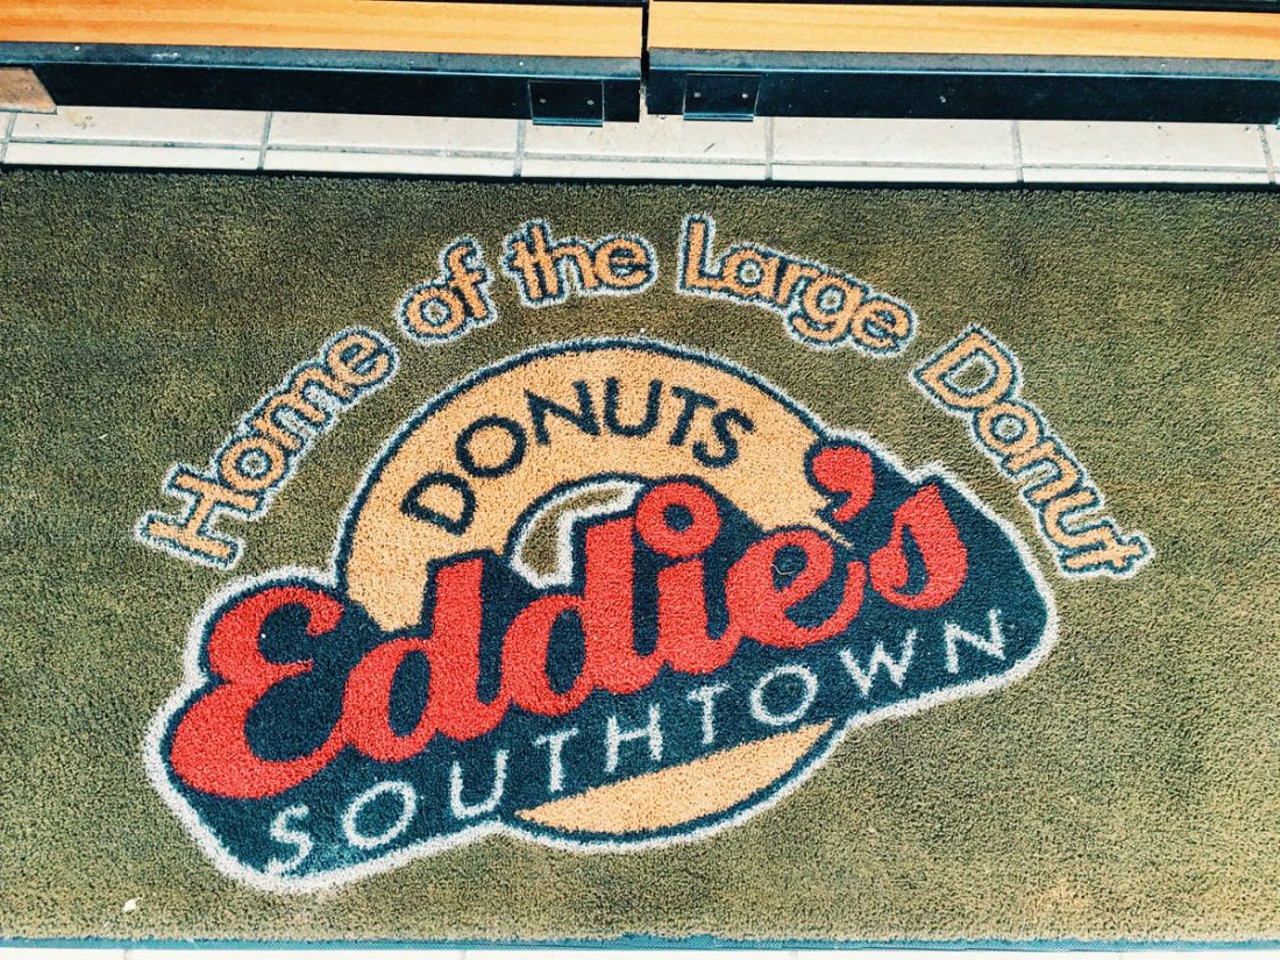 Eddie's Southtown Donuts opens at 5 a.m., and the sooner you get there, the fresher the donuts will be. Finally, a legitimate motivator to become a morning person!